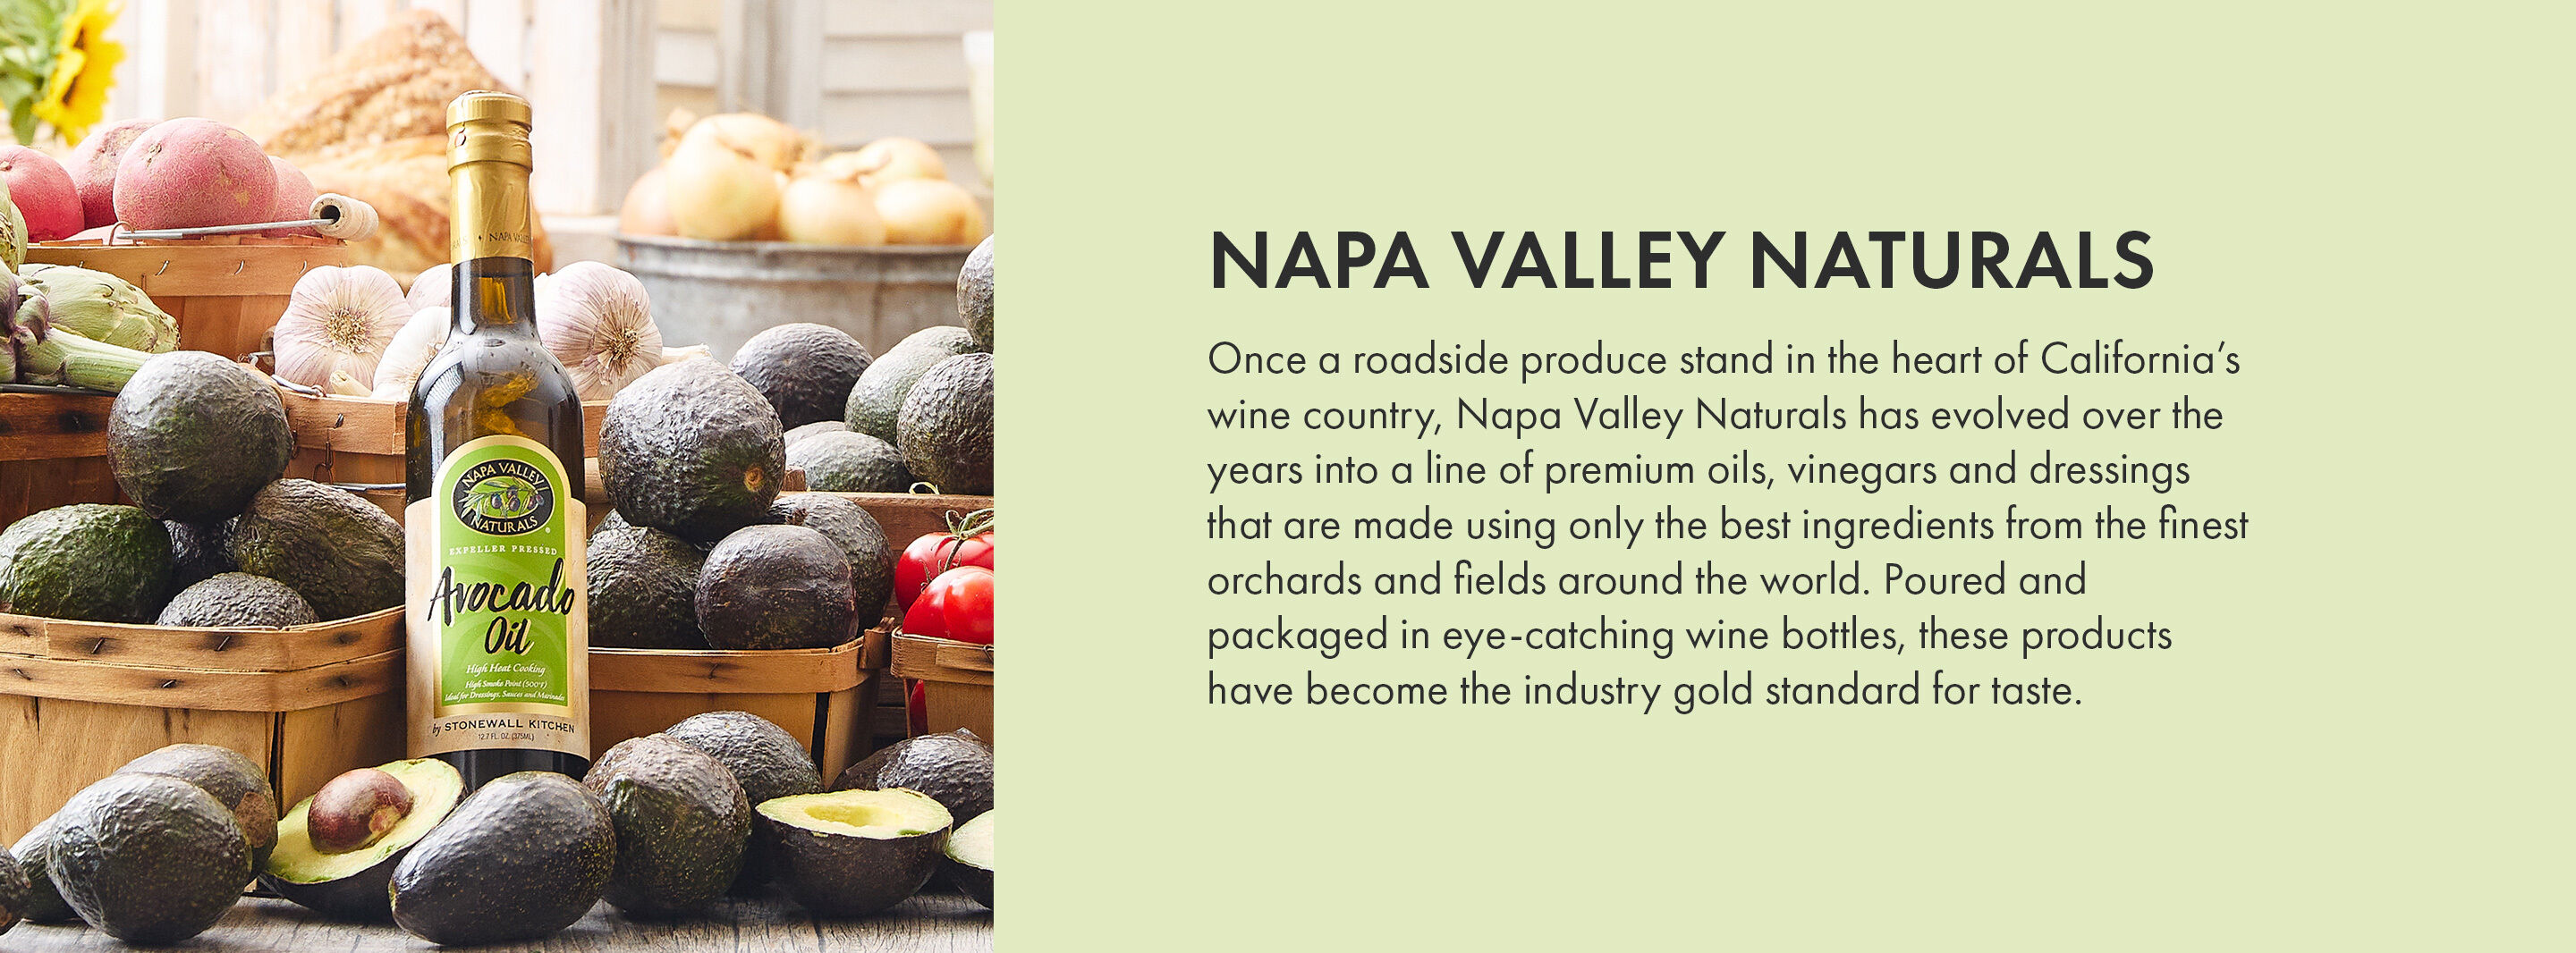 Napa Valley Naturals | Once a roadside produce stand in the heart of California’s wine country, Napa Valley Naturals has evolved over the years into a line of premium oils, vinegars and dressings that are made using only the best ingredients from the finest orchards and fields around the world. Poured and packaged in eye-catching wine bottles, these products have become the industry gold standard for taste.